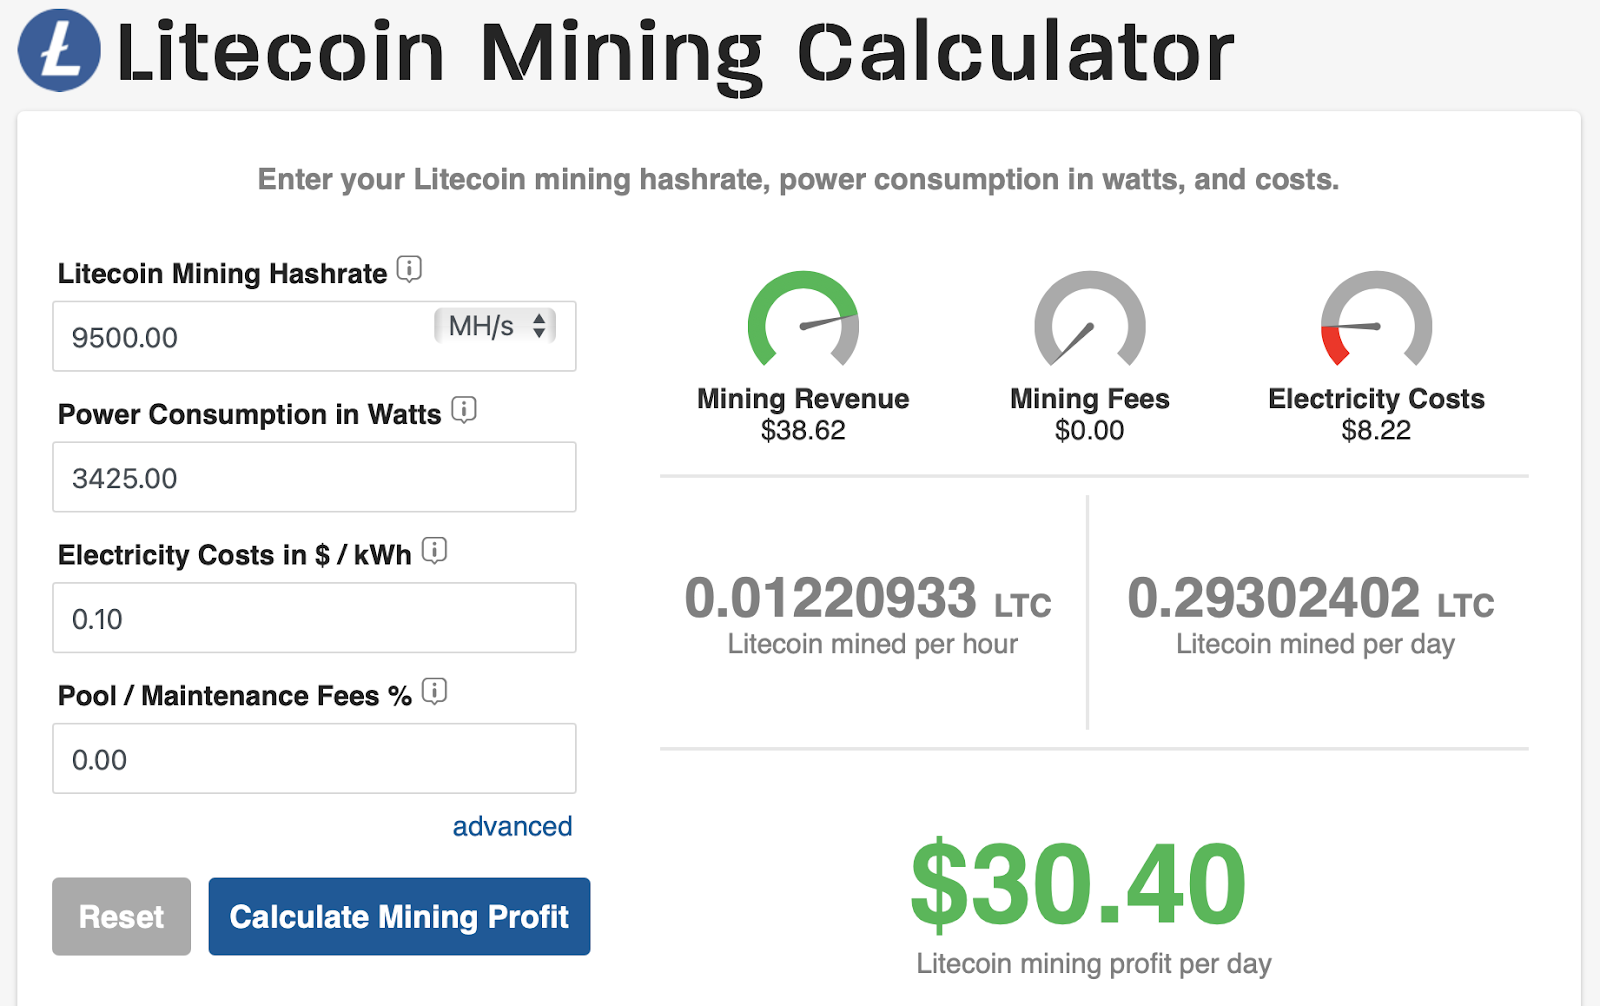 How to Mine Litecoin? - A Step-by-Step Guide for Beginners